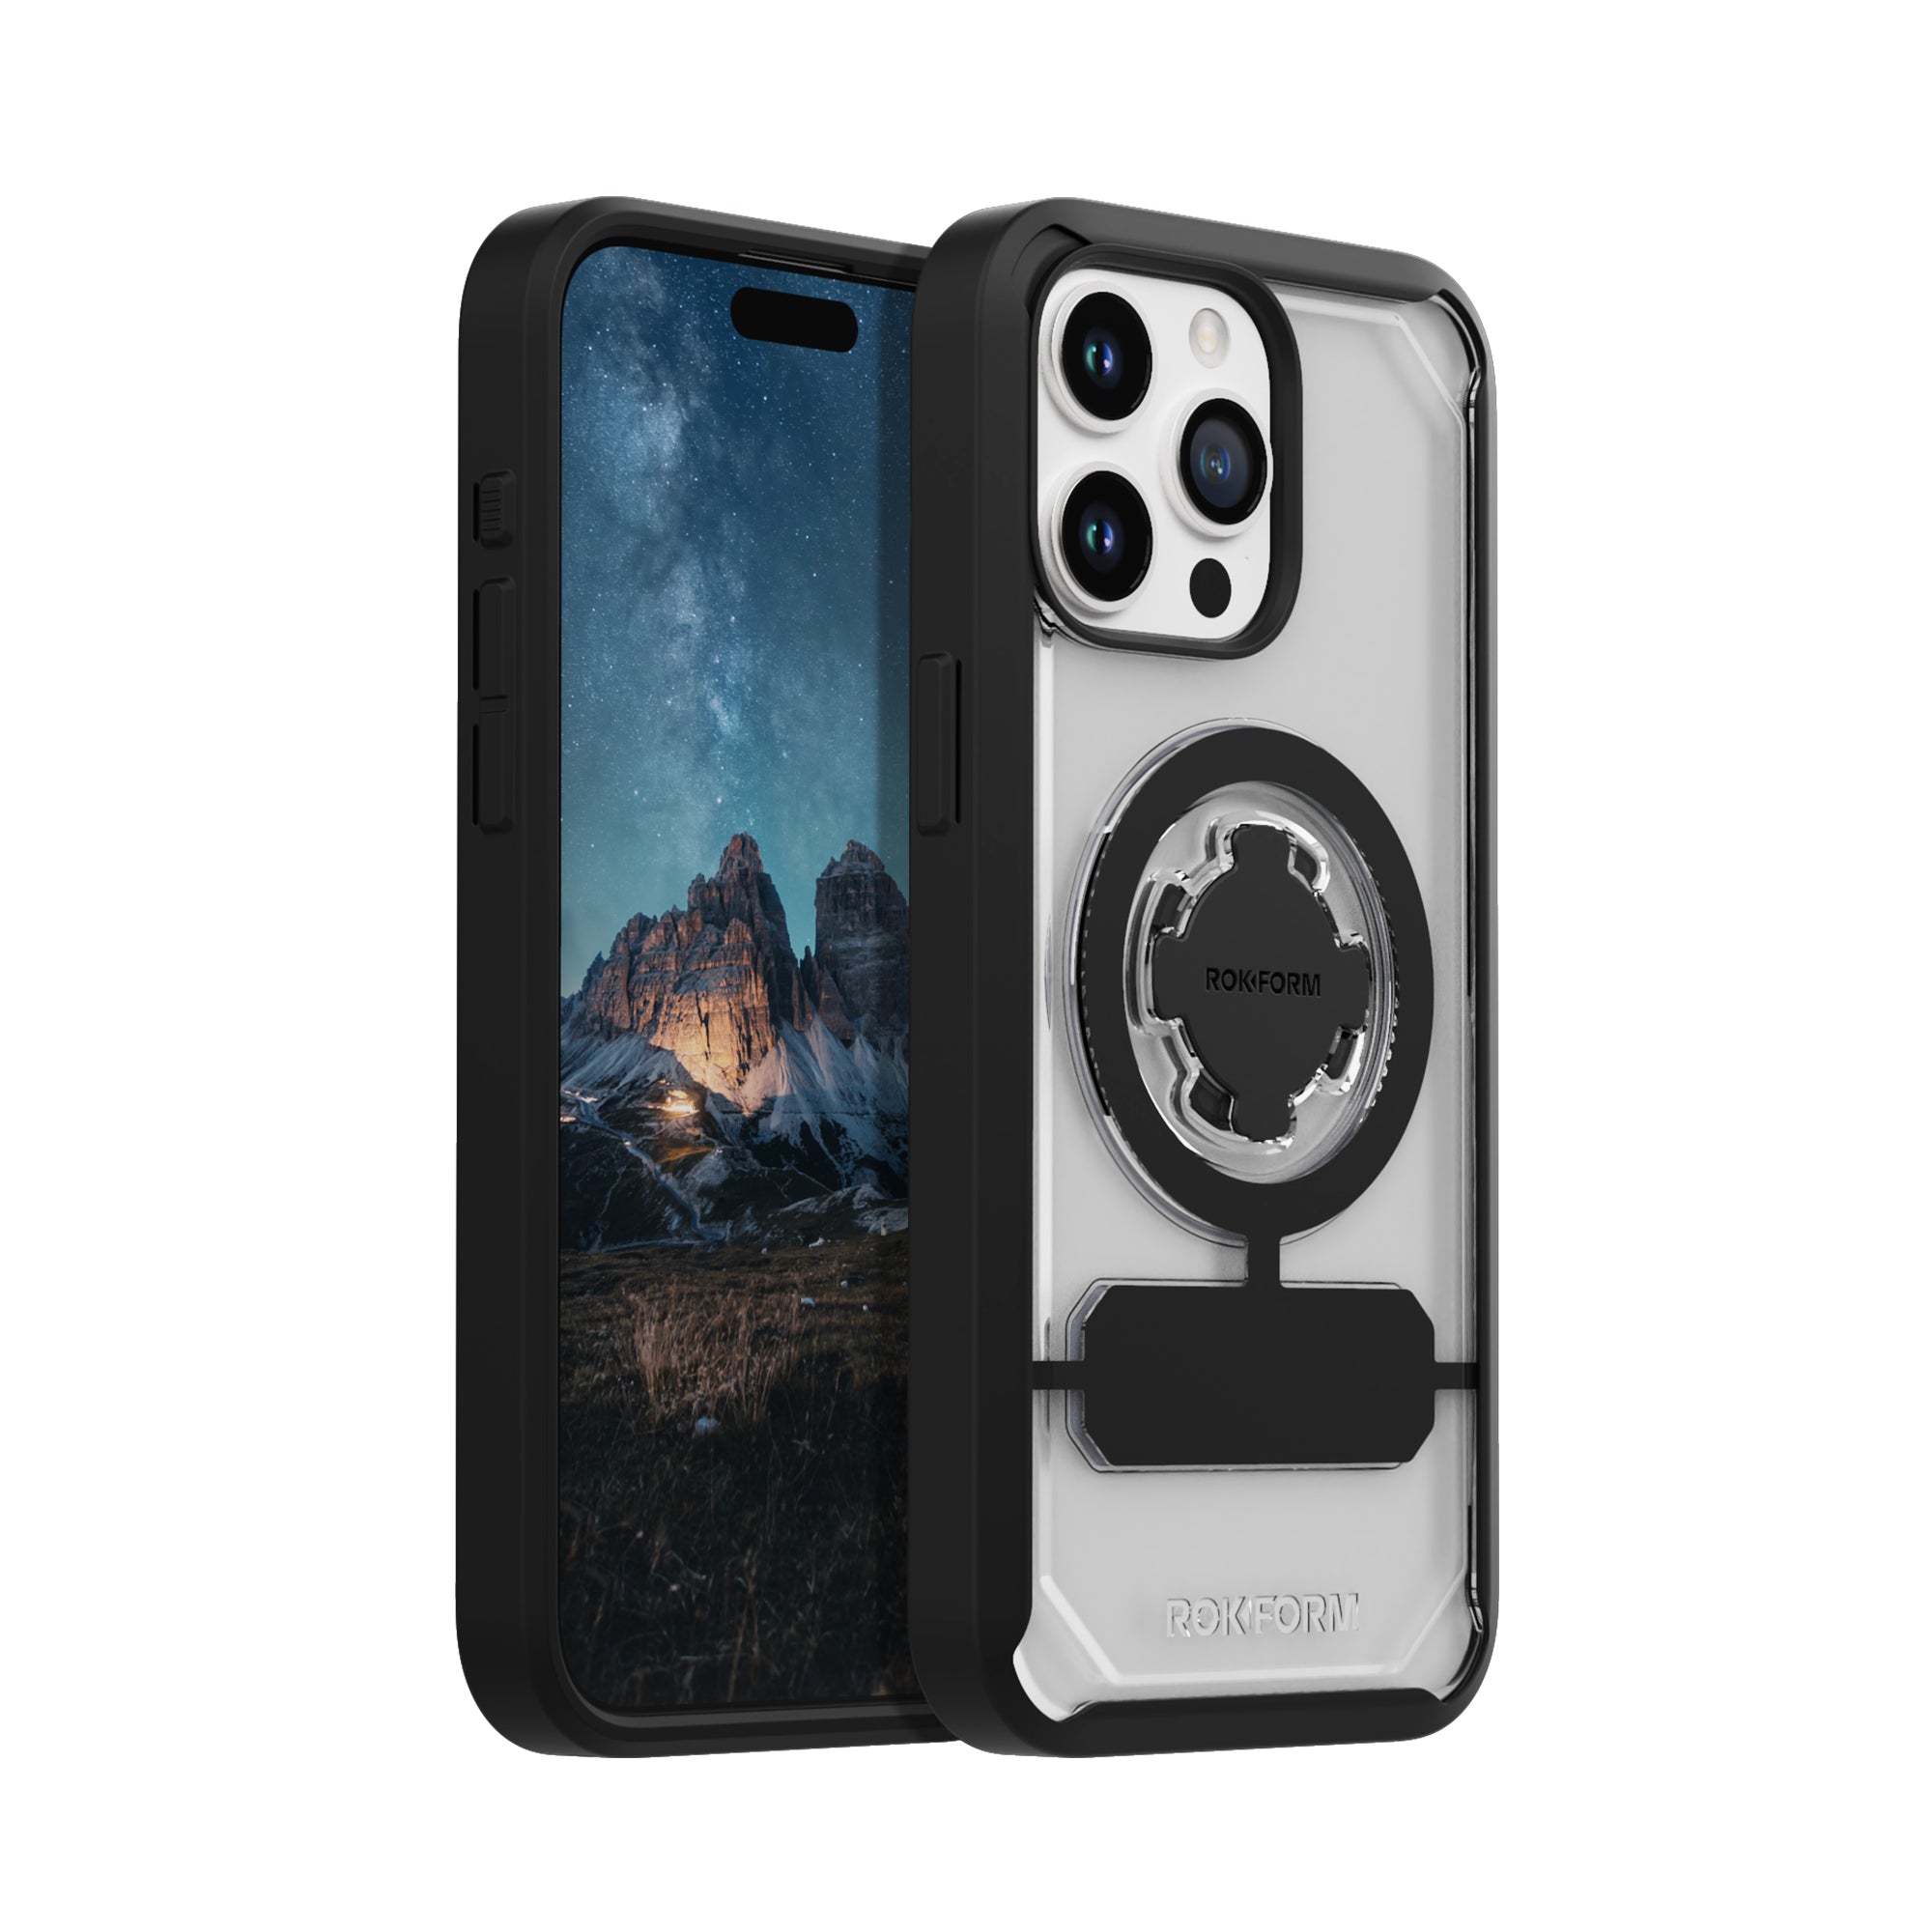 Best designer phone cases for iPhone, Samsung devices and more